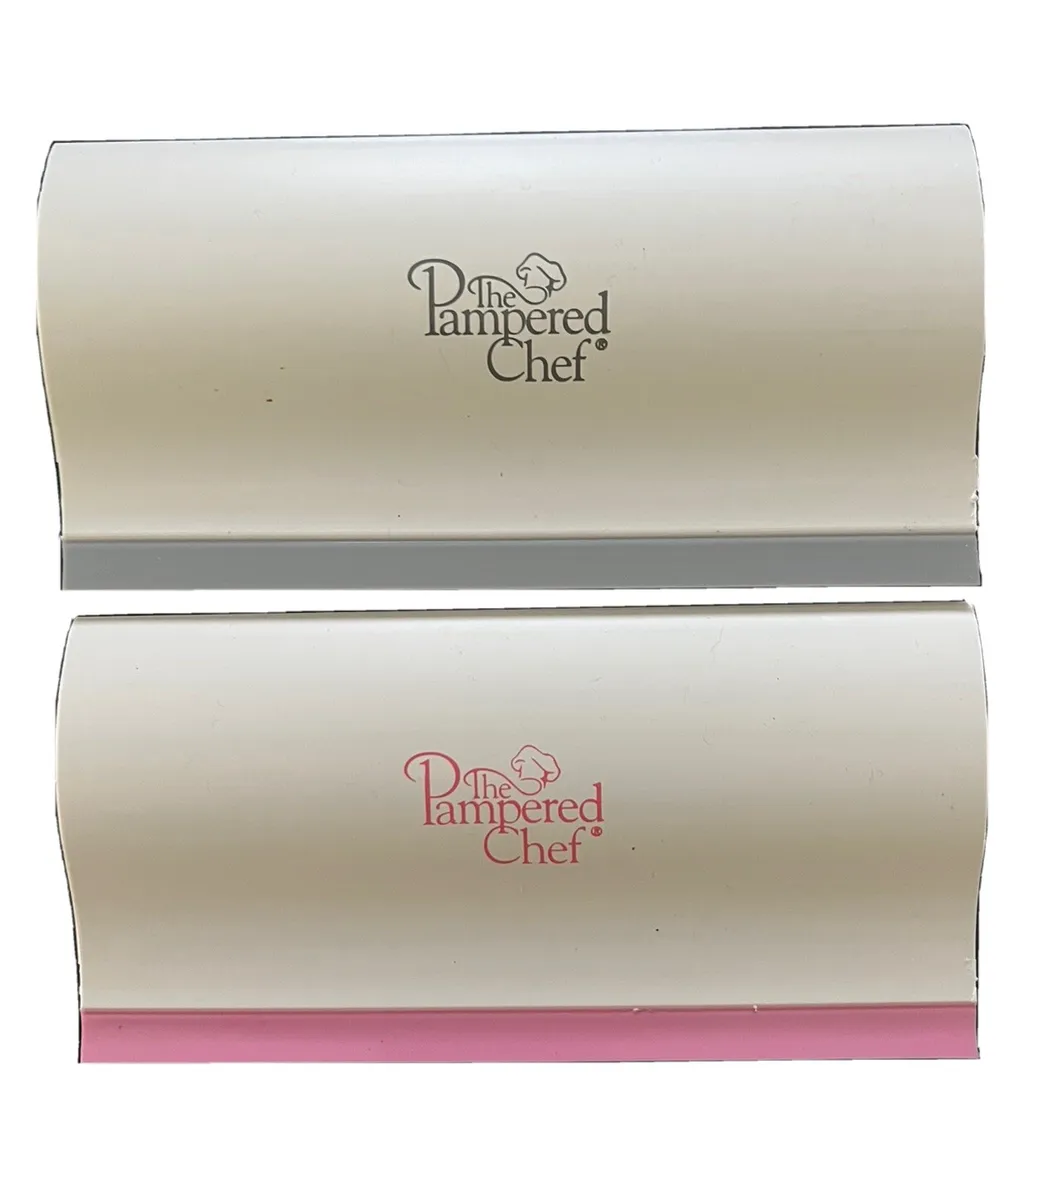 Pampered Chef Handy Scraper Rare Pink Color AND Classic Grey included.